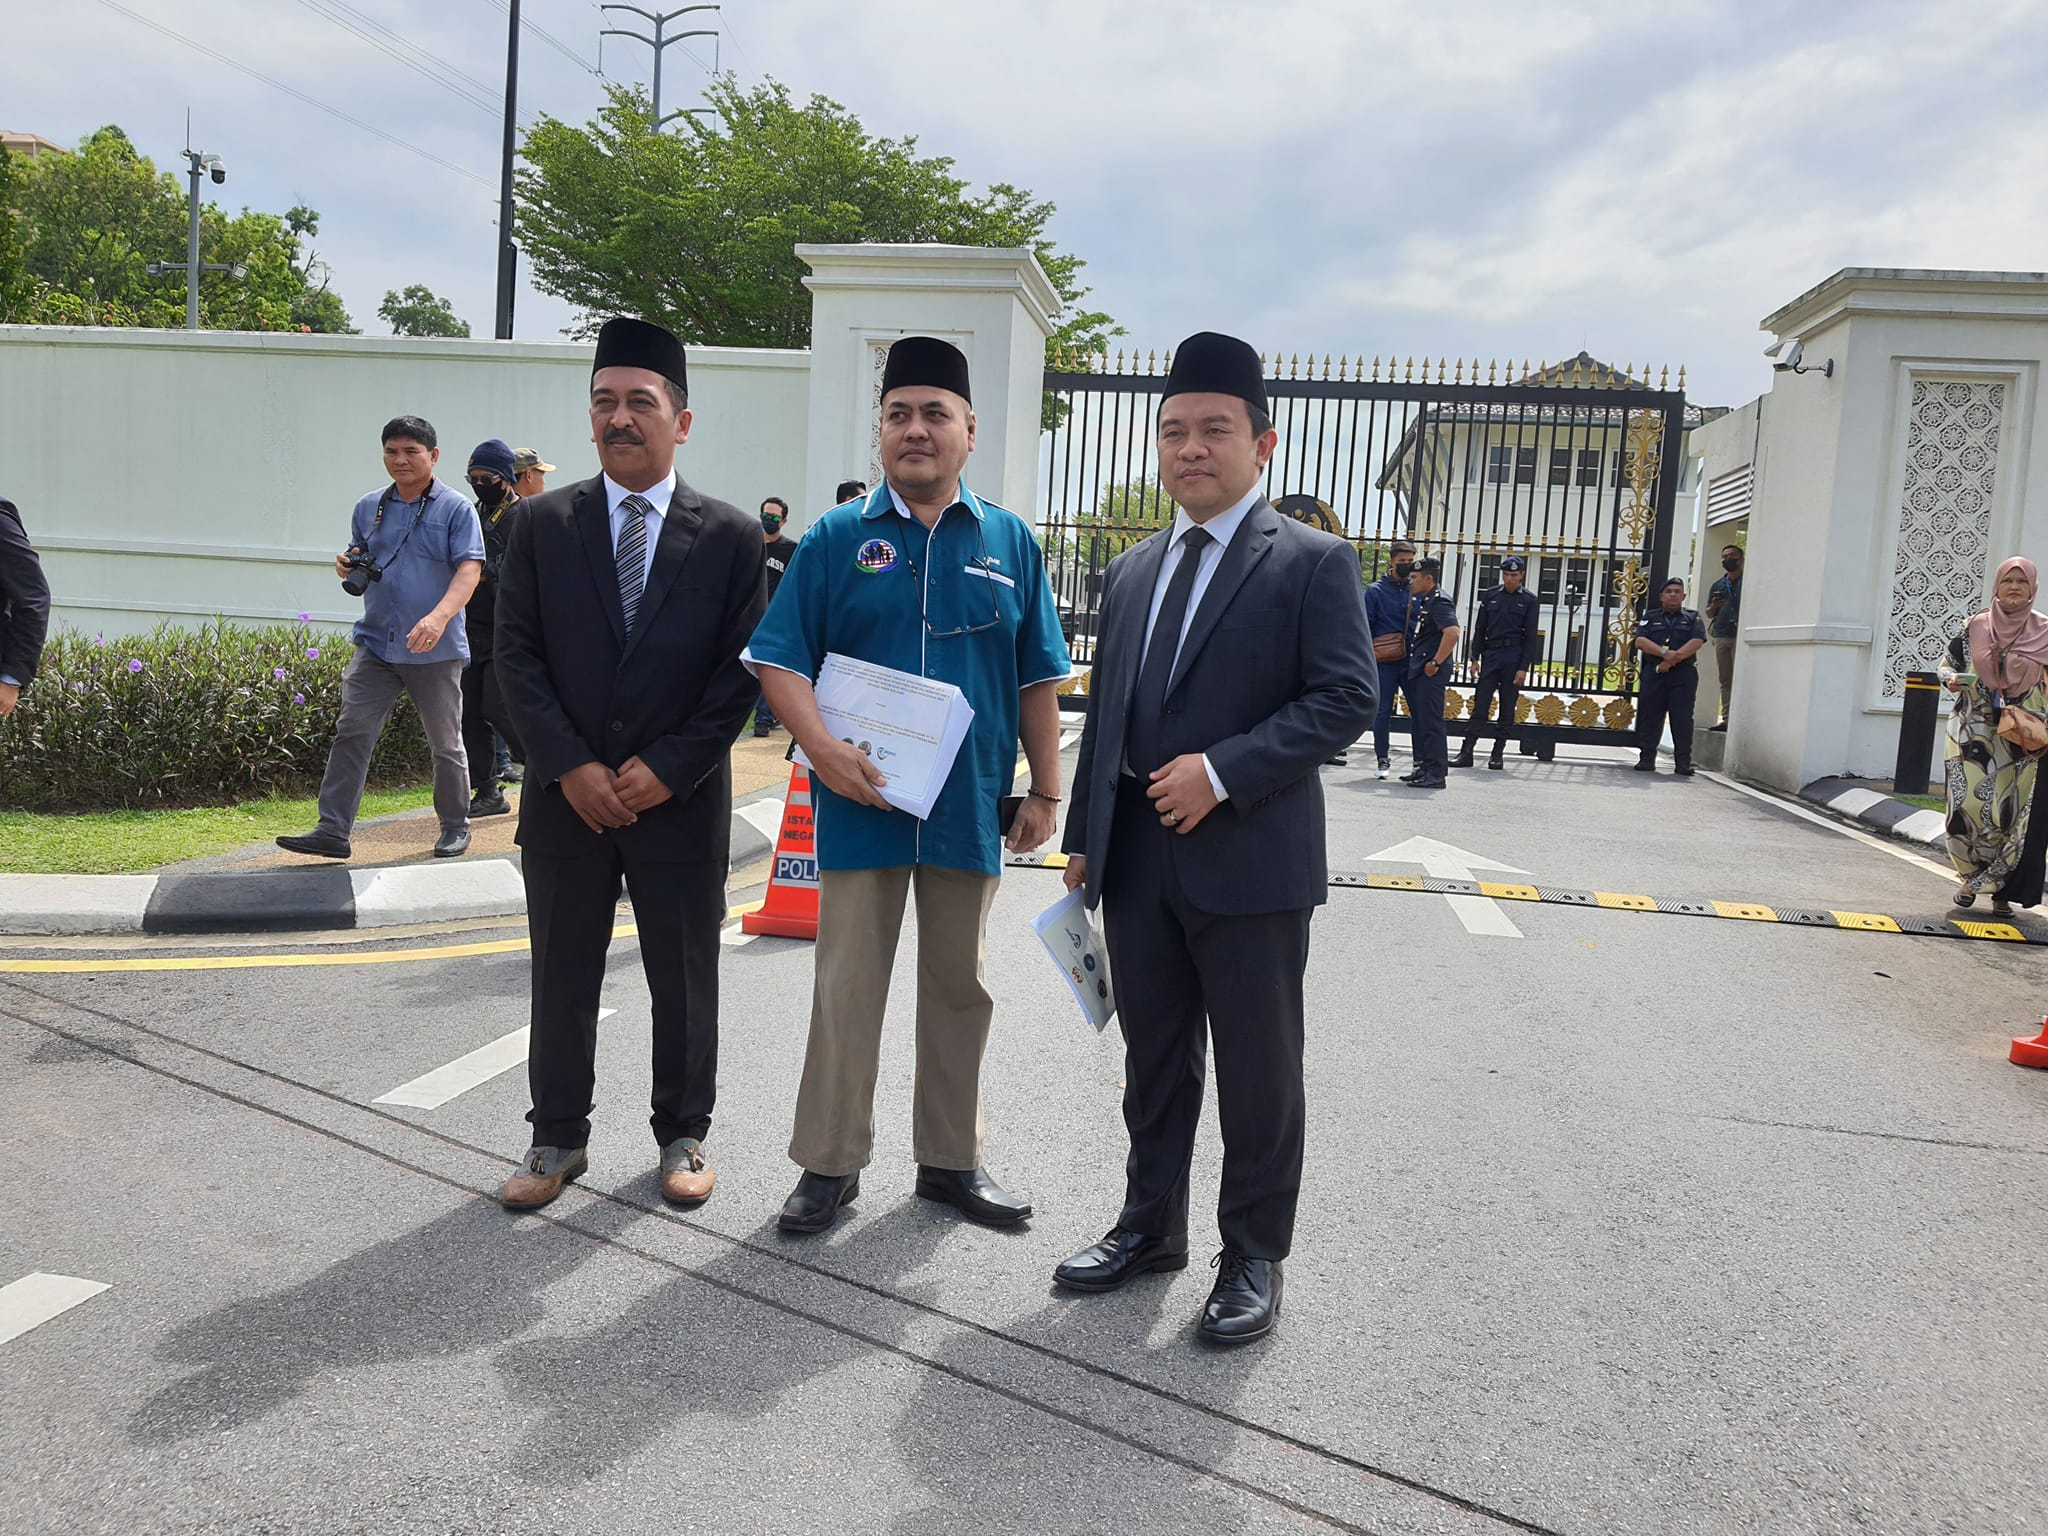 M'sian taxi driver walks more than 300km from johor to istana negara to ask for epf withdrawal